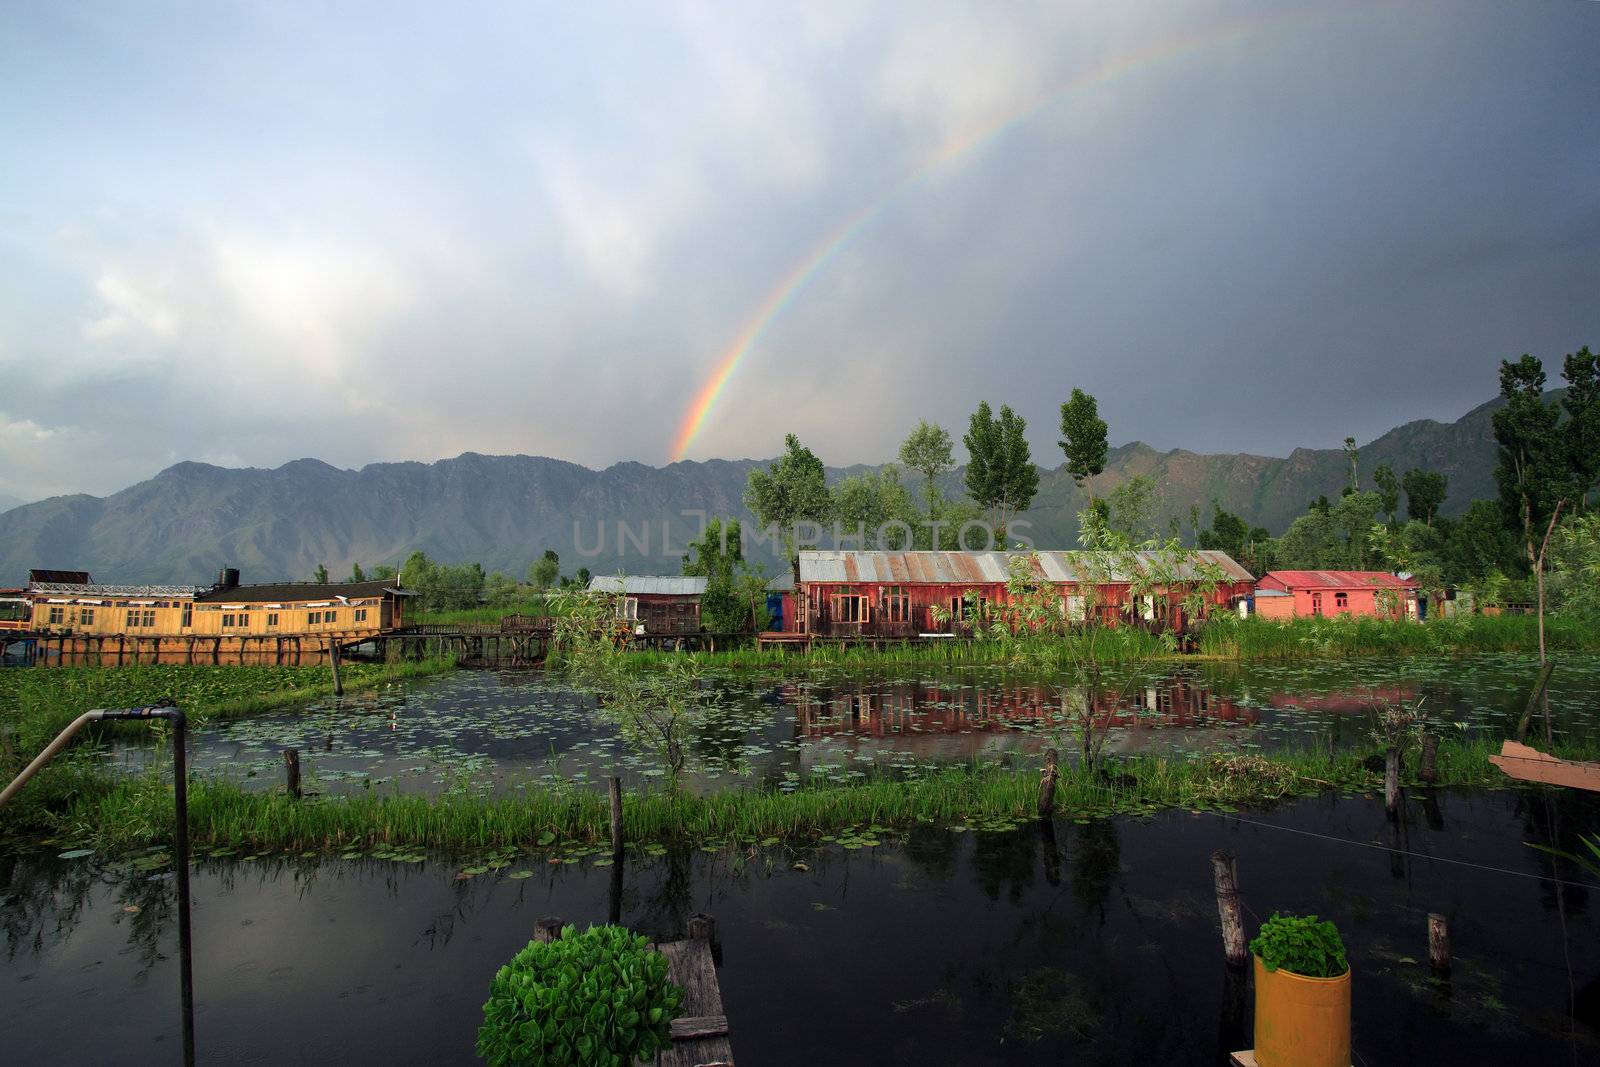 Houseboats in Srinigar, Kashmir (India) - after a light rain a rainbow appears in the distance with mountains as the backdrop.
